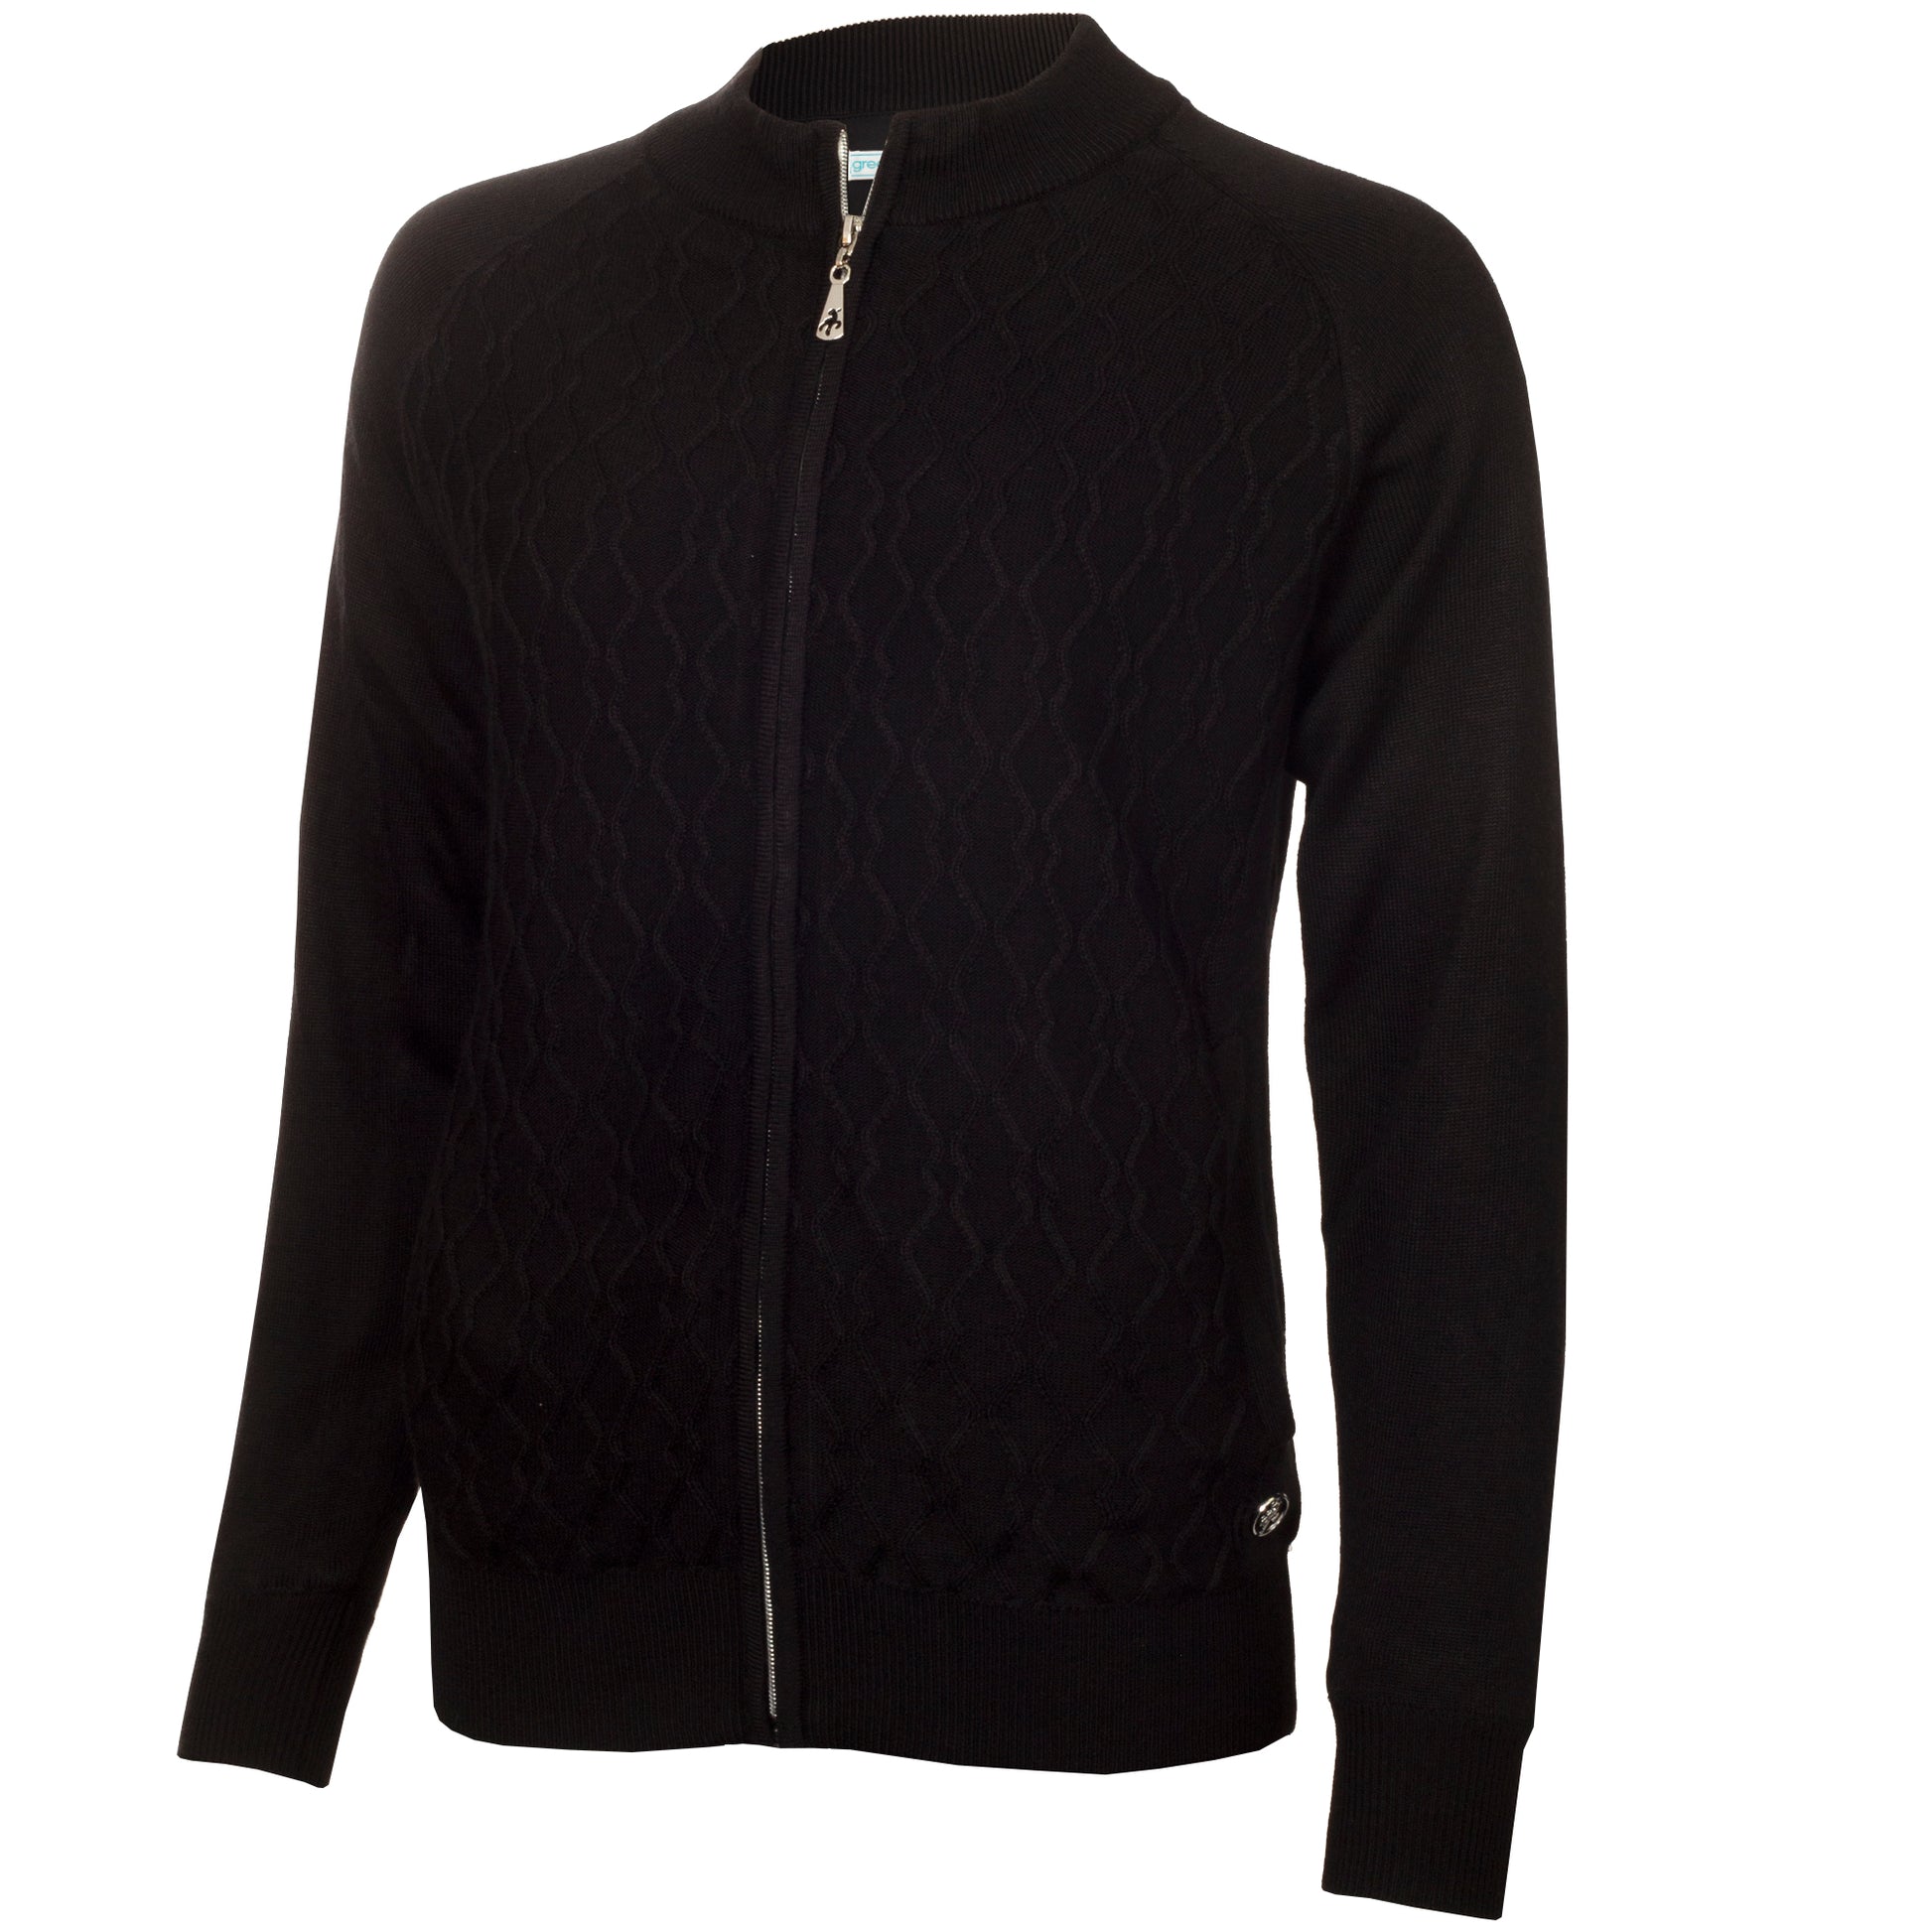 Green Lamb Ladies Lined Windstopper Cardigan with ZigZag Stitch Front Panel in Black